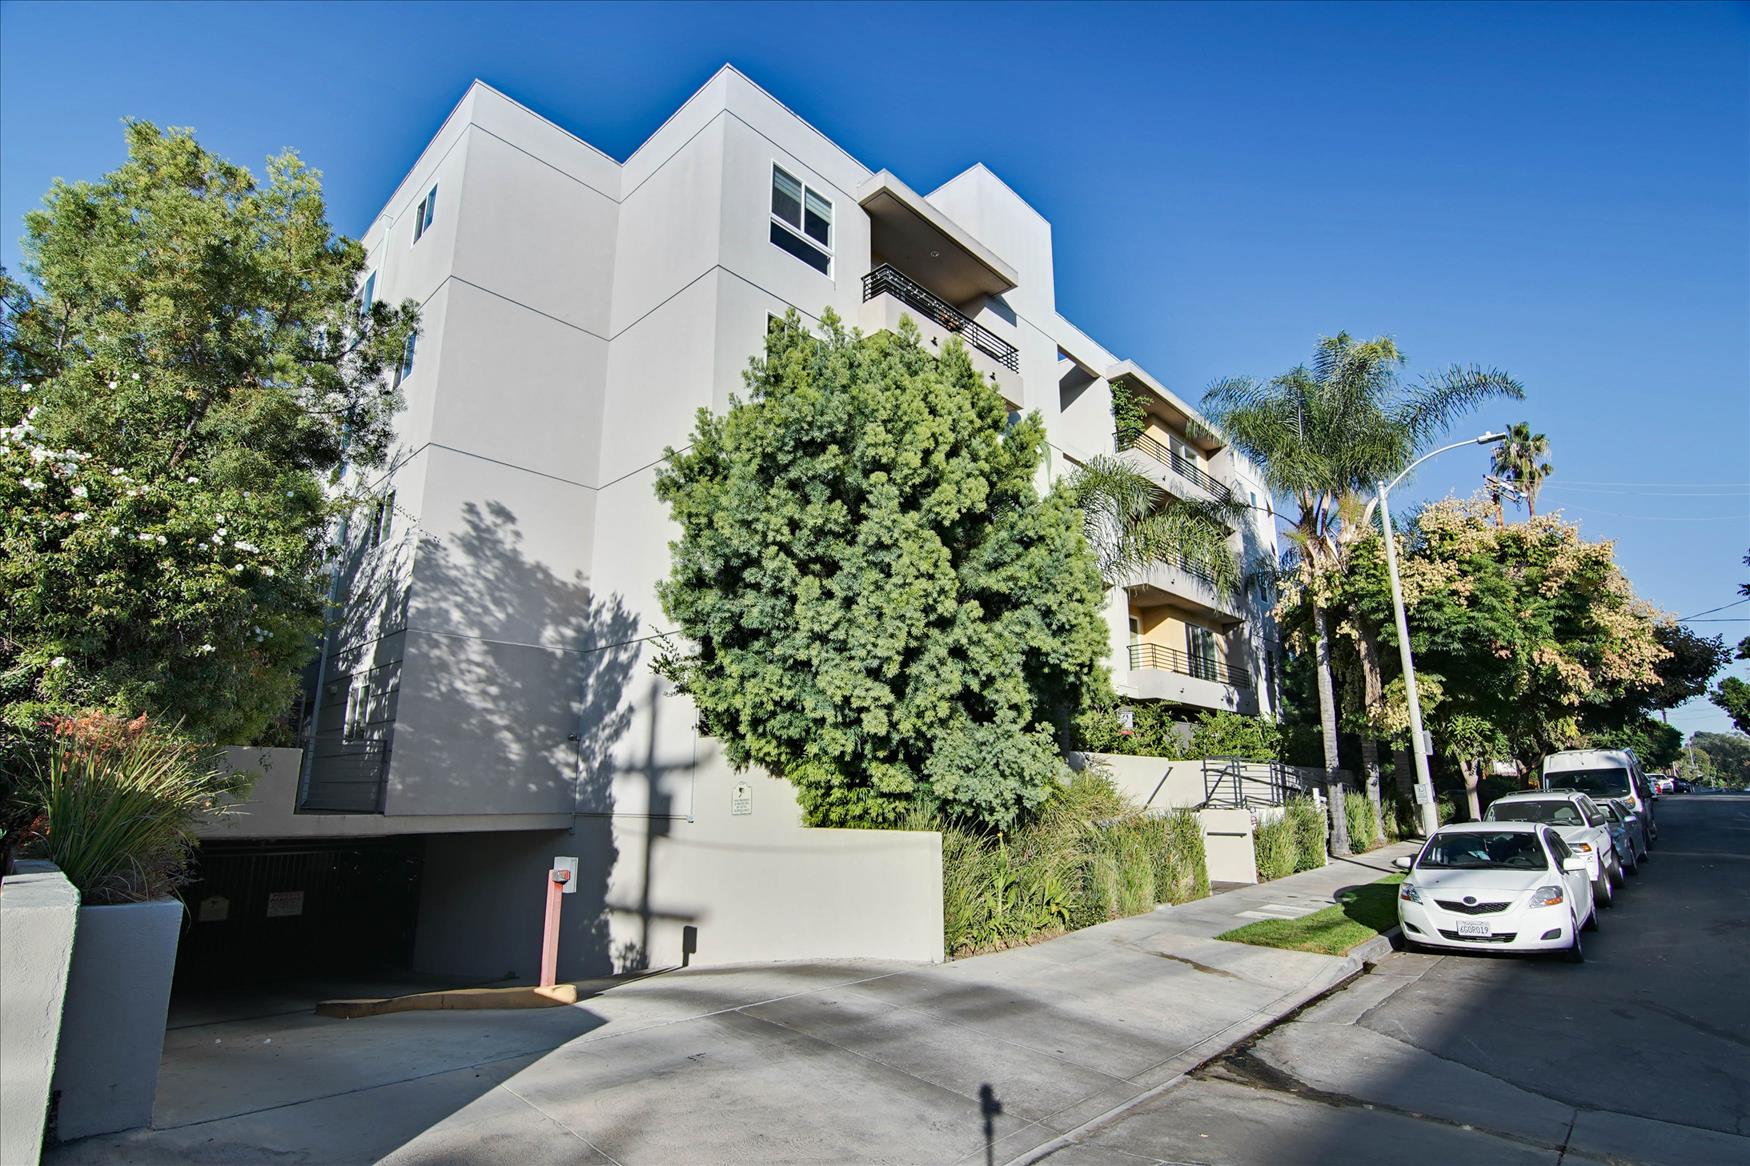 Beautiful Studio City, Los Angeles, CA house showcasing the best property management services